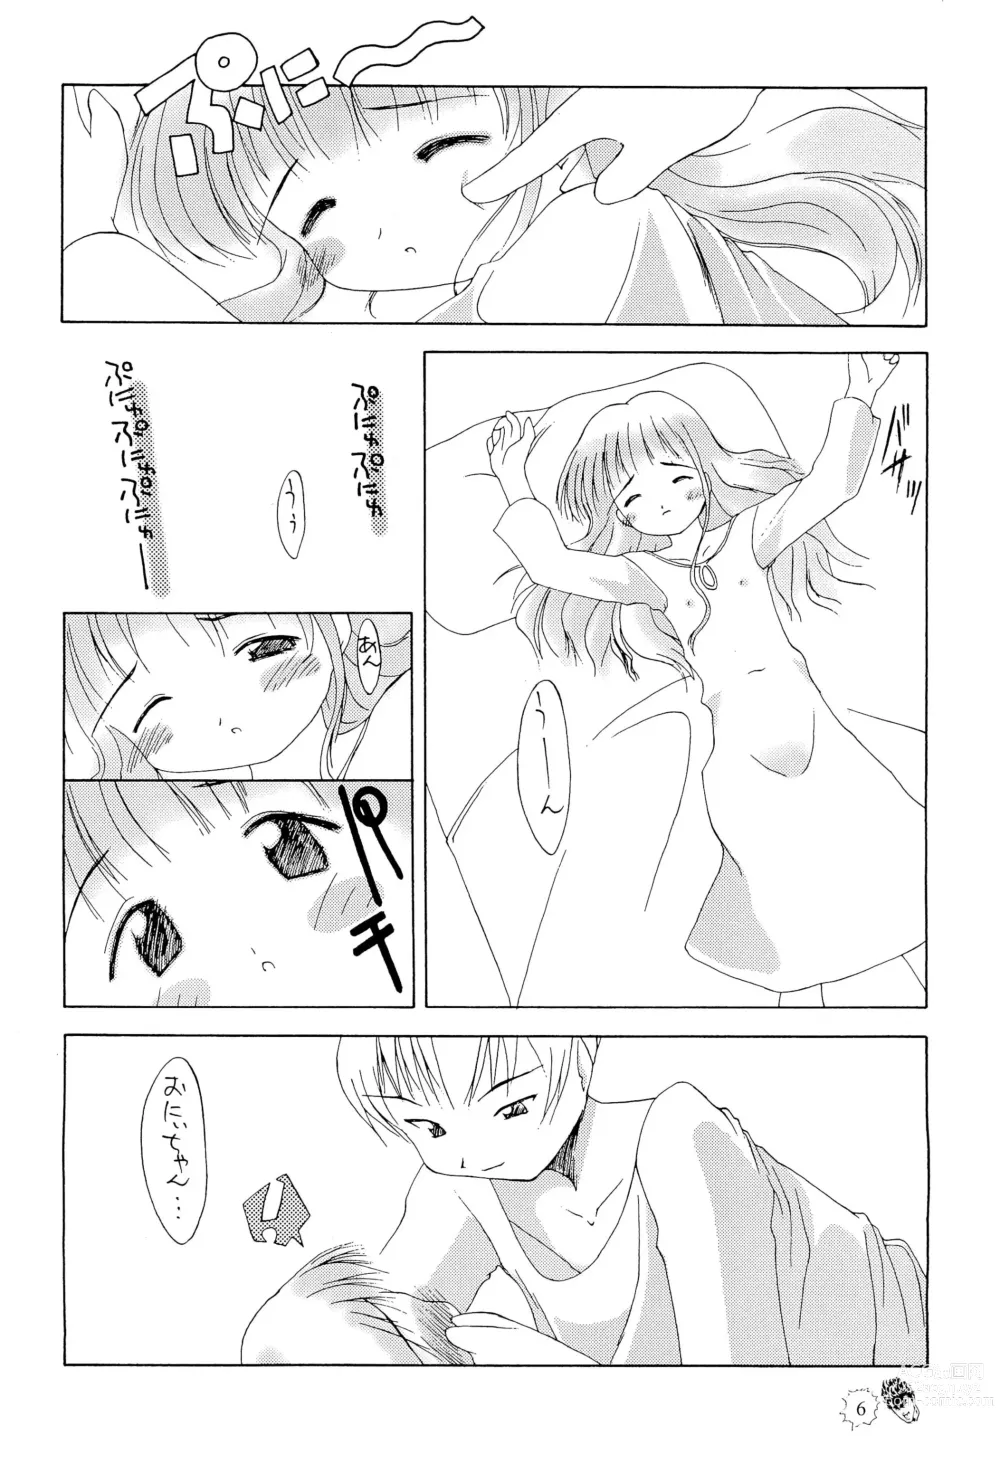 Page 6 of doujinshi CHIBICKERS 4